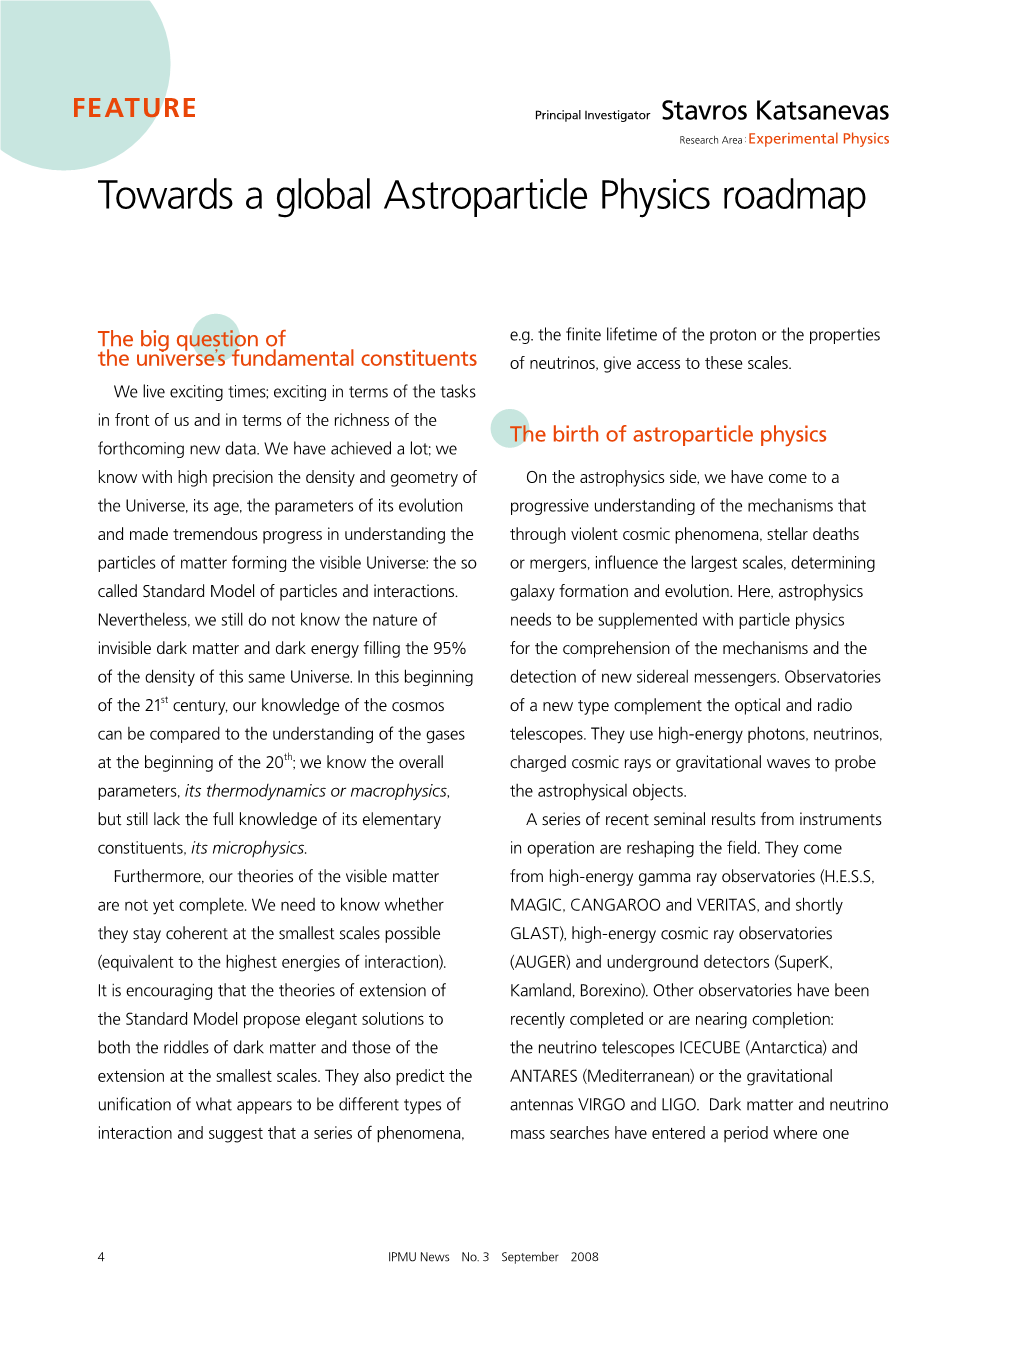 Towards a Global Astroparticle Physics Roadmap